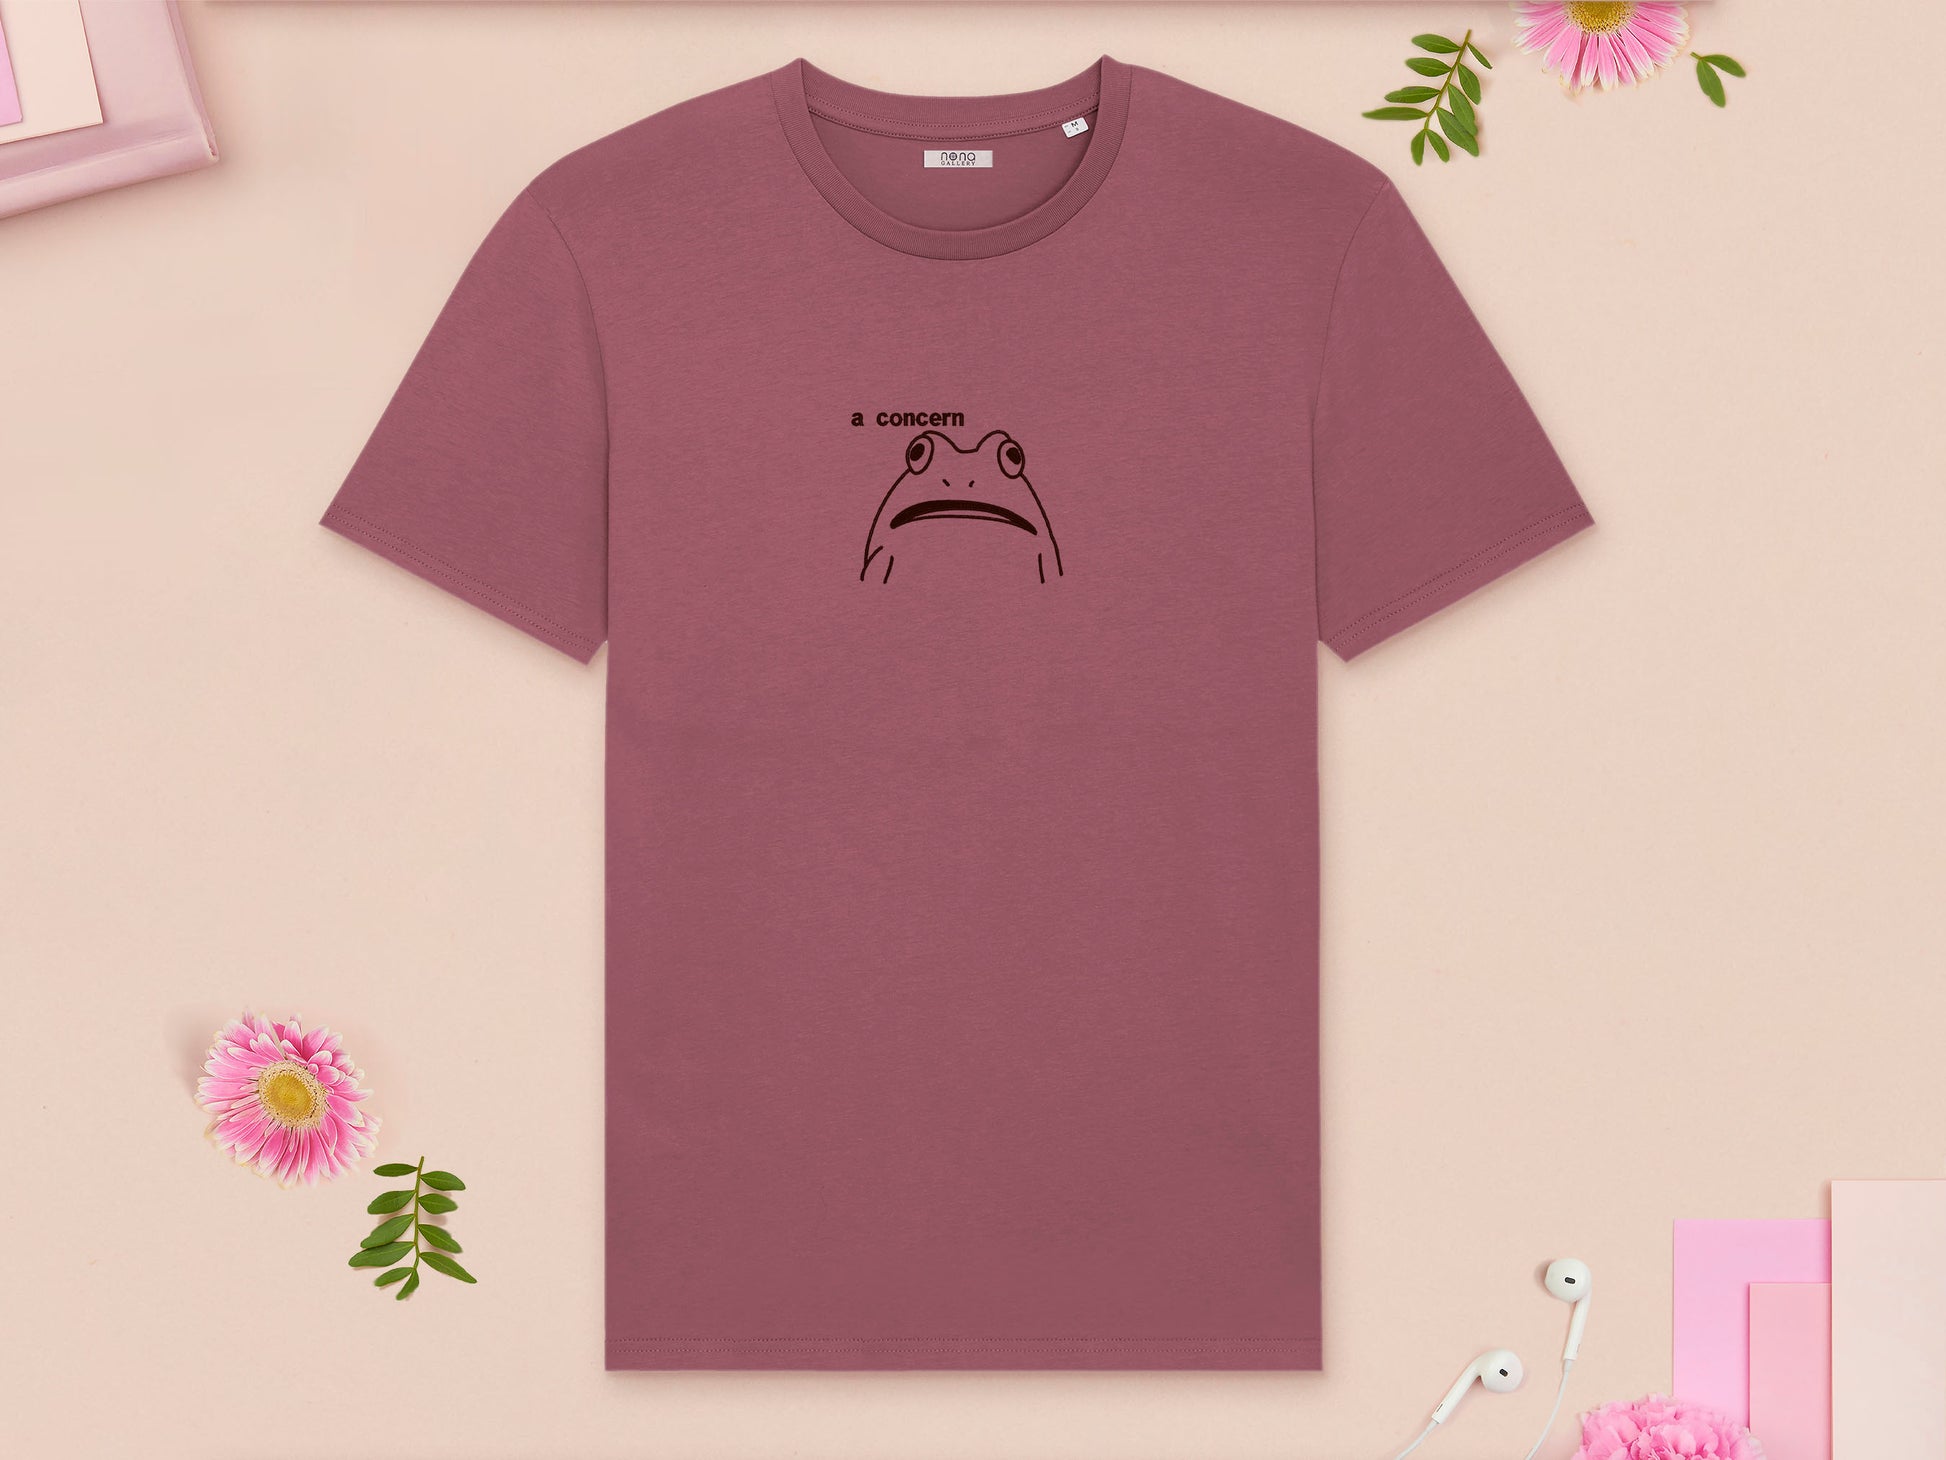 A red crew neck short sleeve t-shirt, with an embroidered brown thread design of cute confused looking frog with the text a concern.